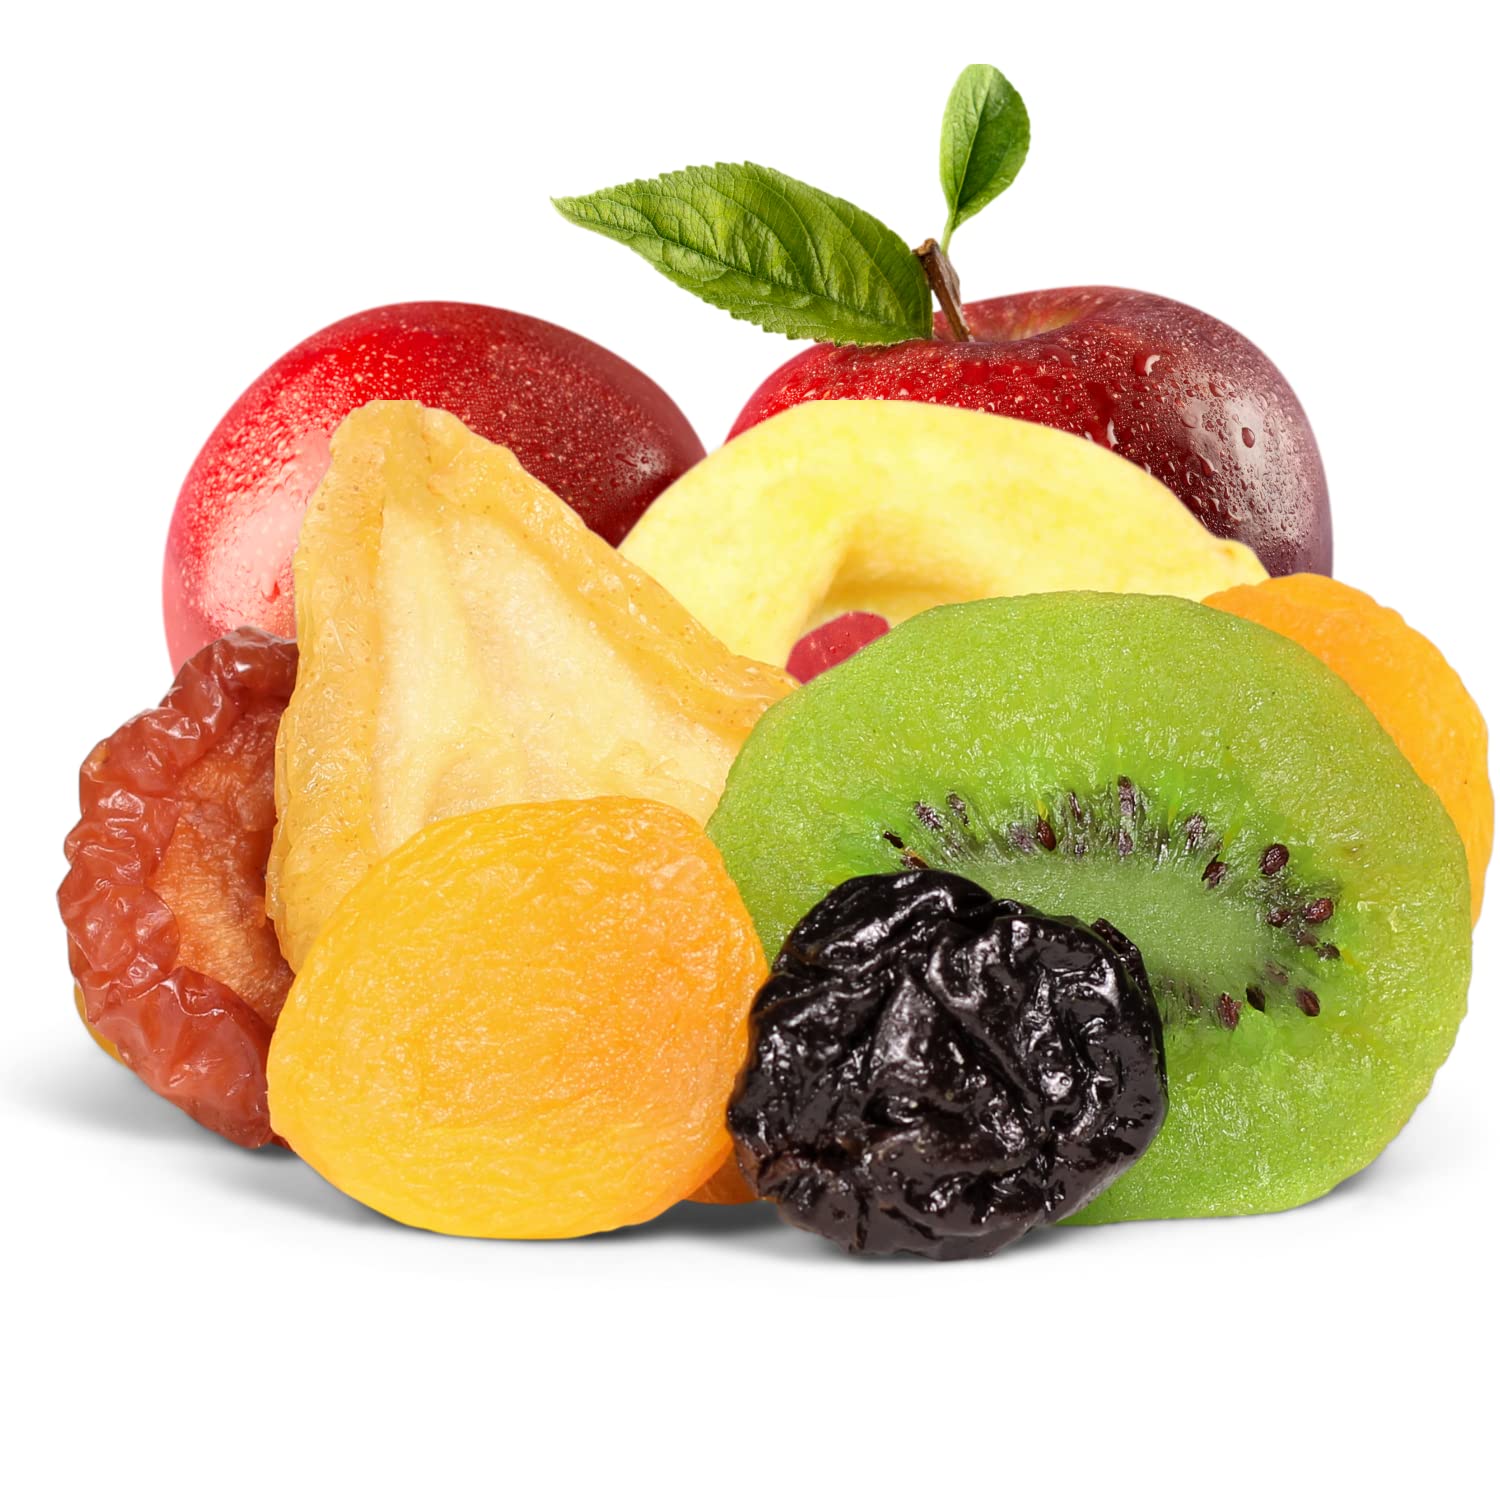 Dried Mixed Fruit with Prunes by It's Delish, 2 lbs (32 Oz) Bulk | Snack Mix of Prunes, Apricots, Plums, Apple Rings, Ne